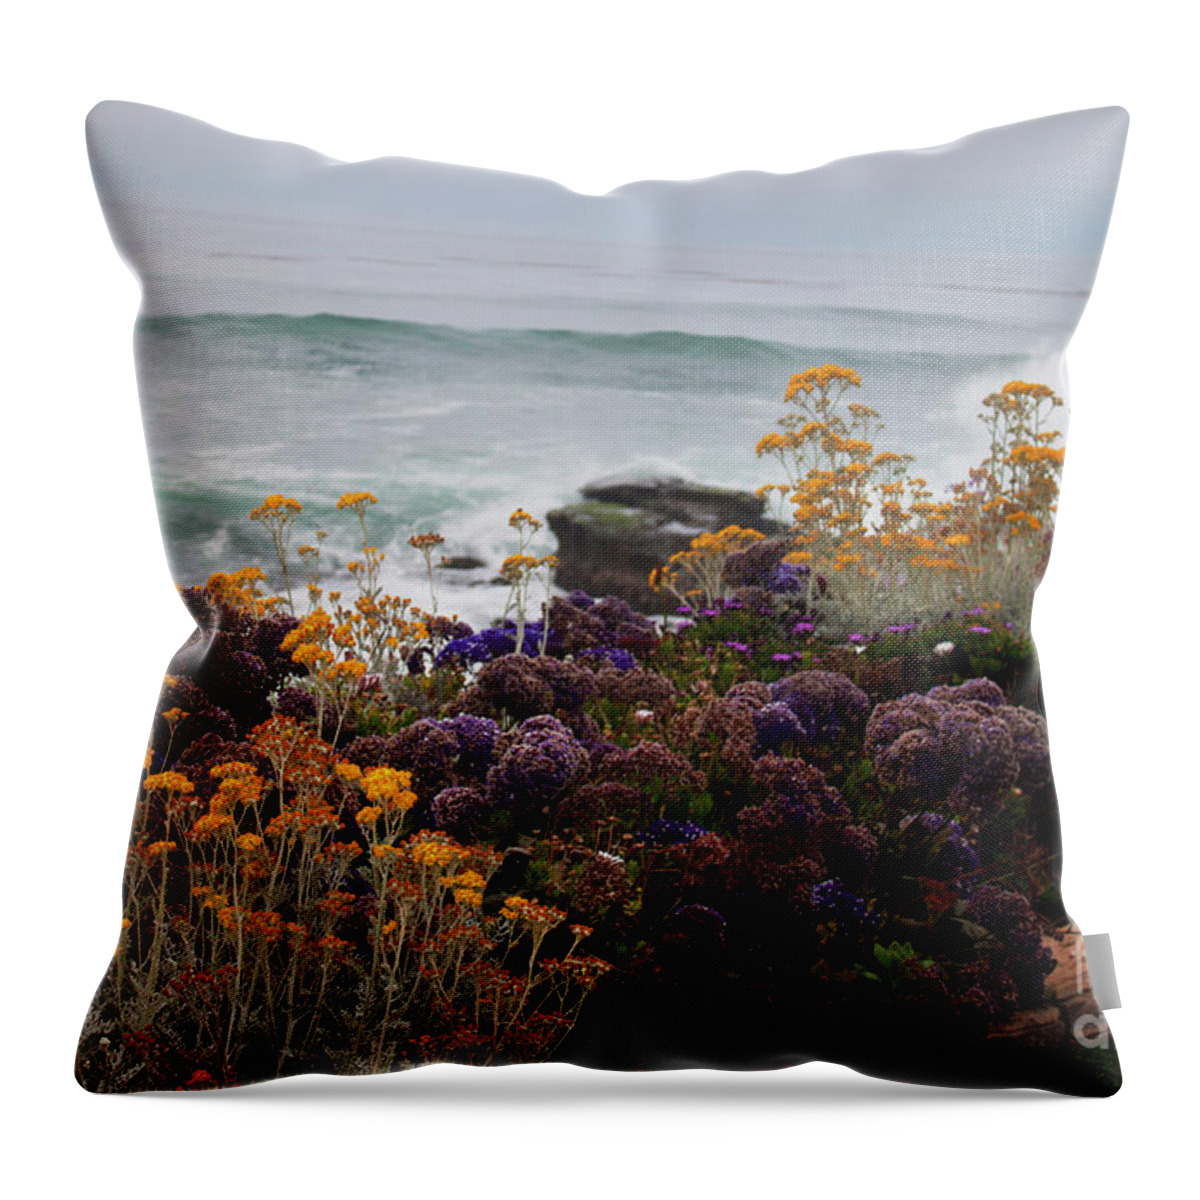 Garden View Throw Pillow featuring the photograph Garden View by Ivete Basso Photography